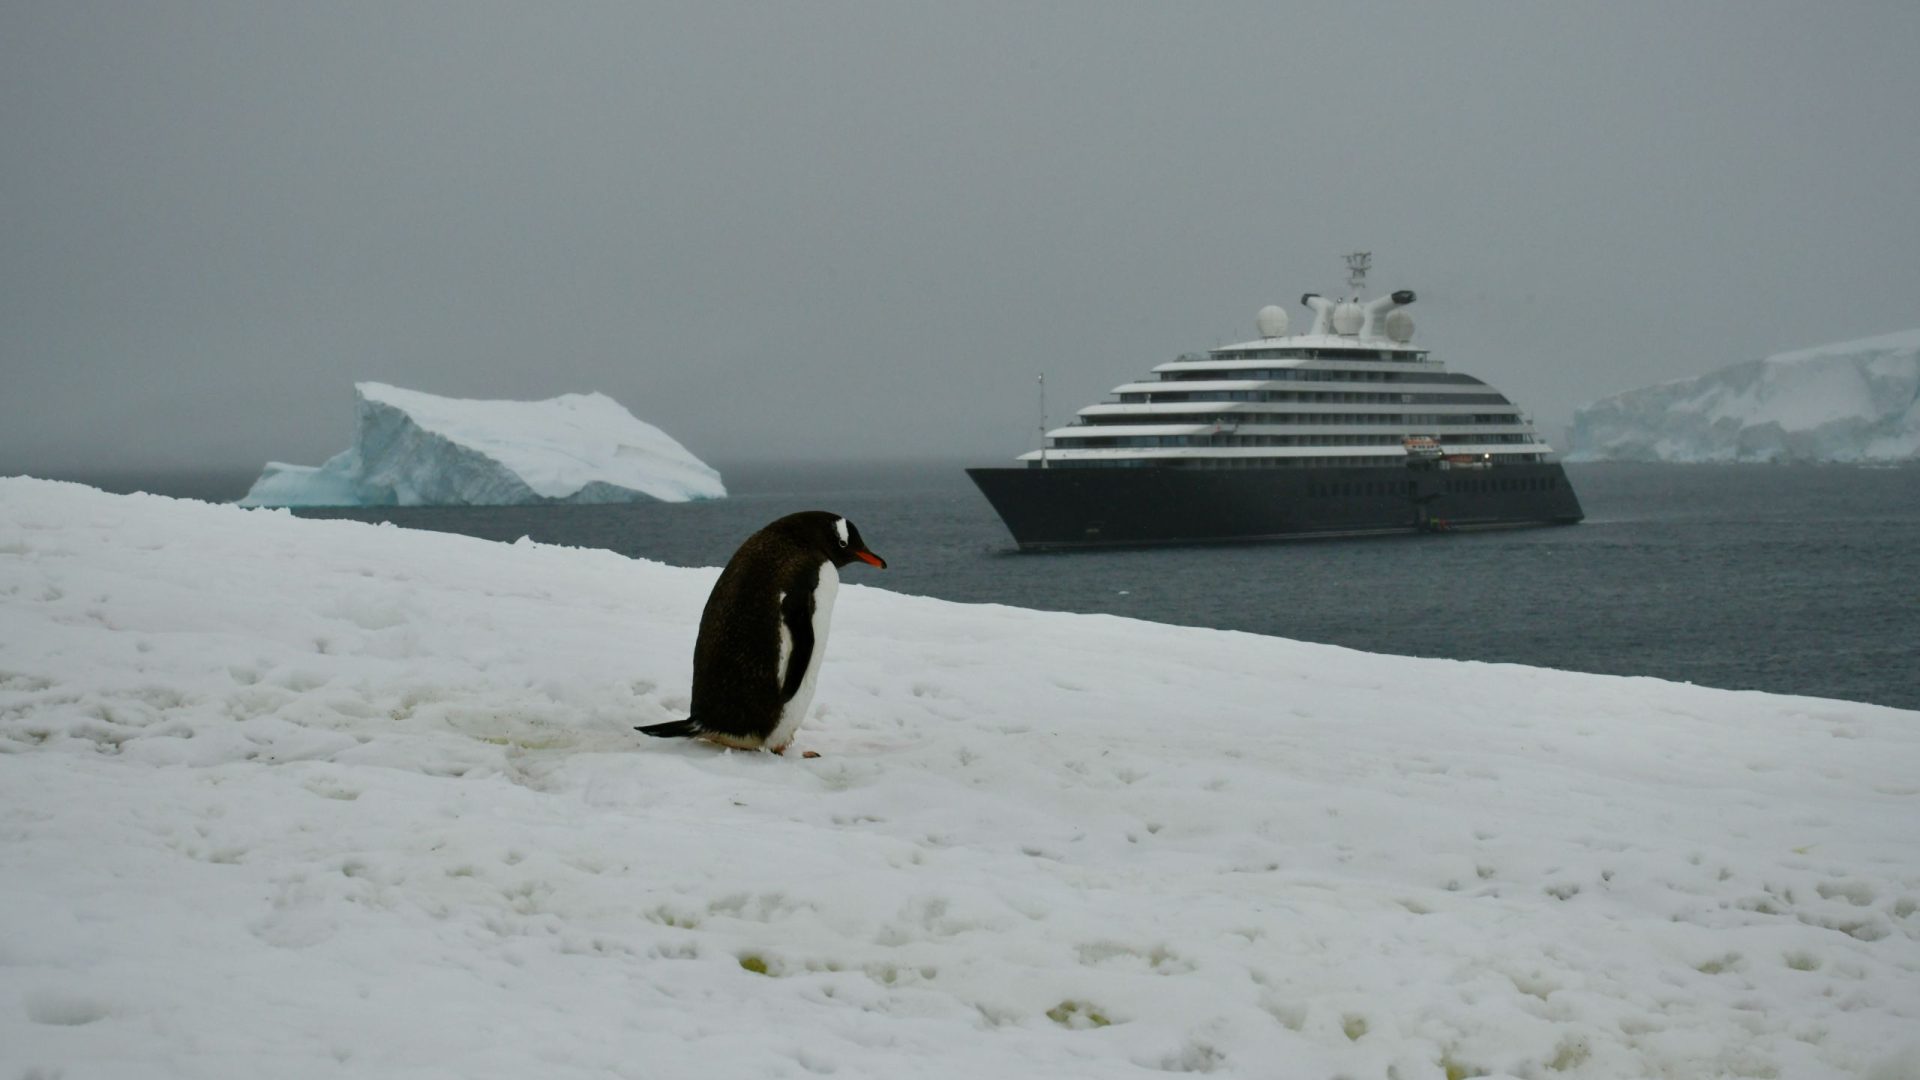 A solitary penguin on the ice with a cruise ship in the distance.